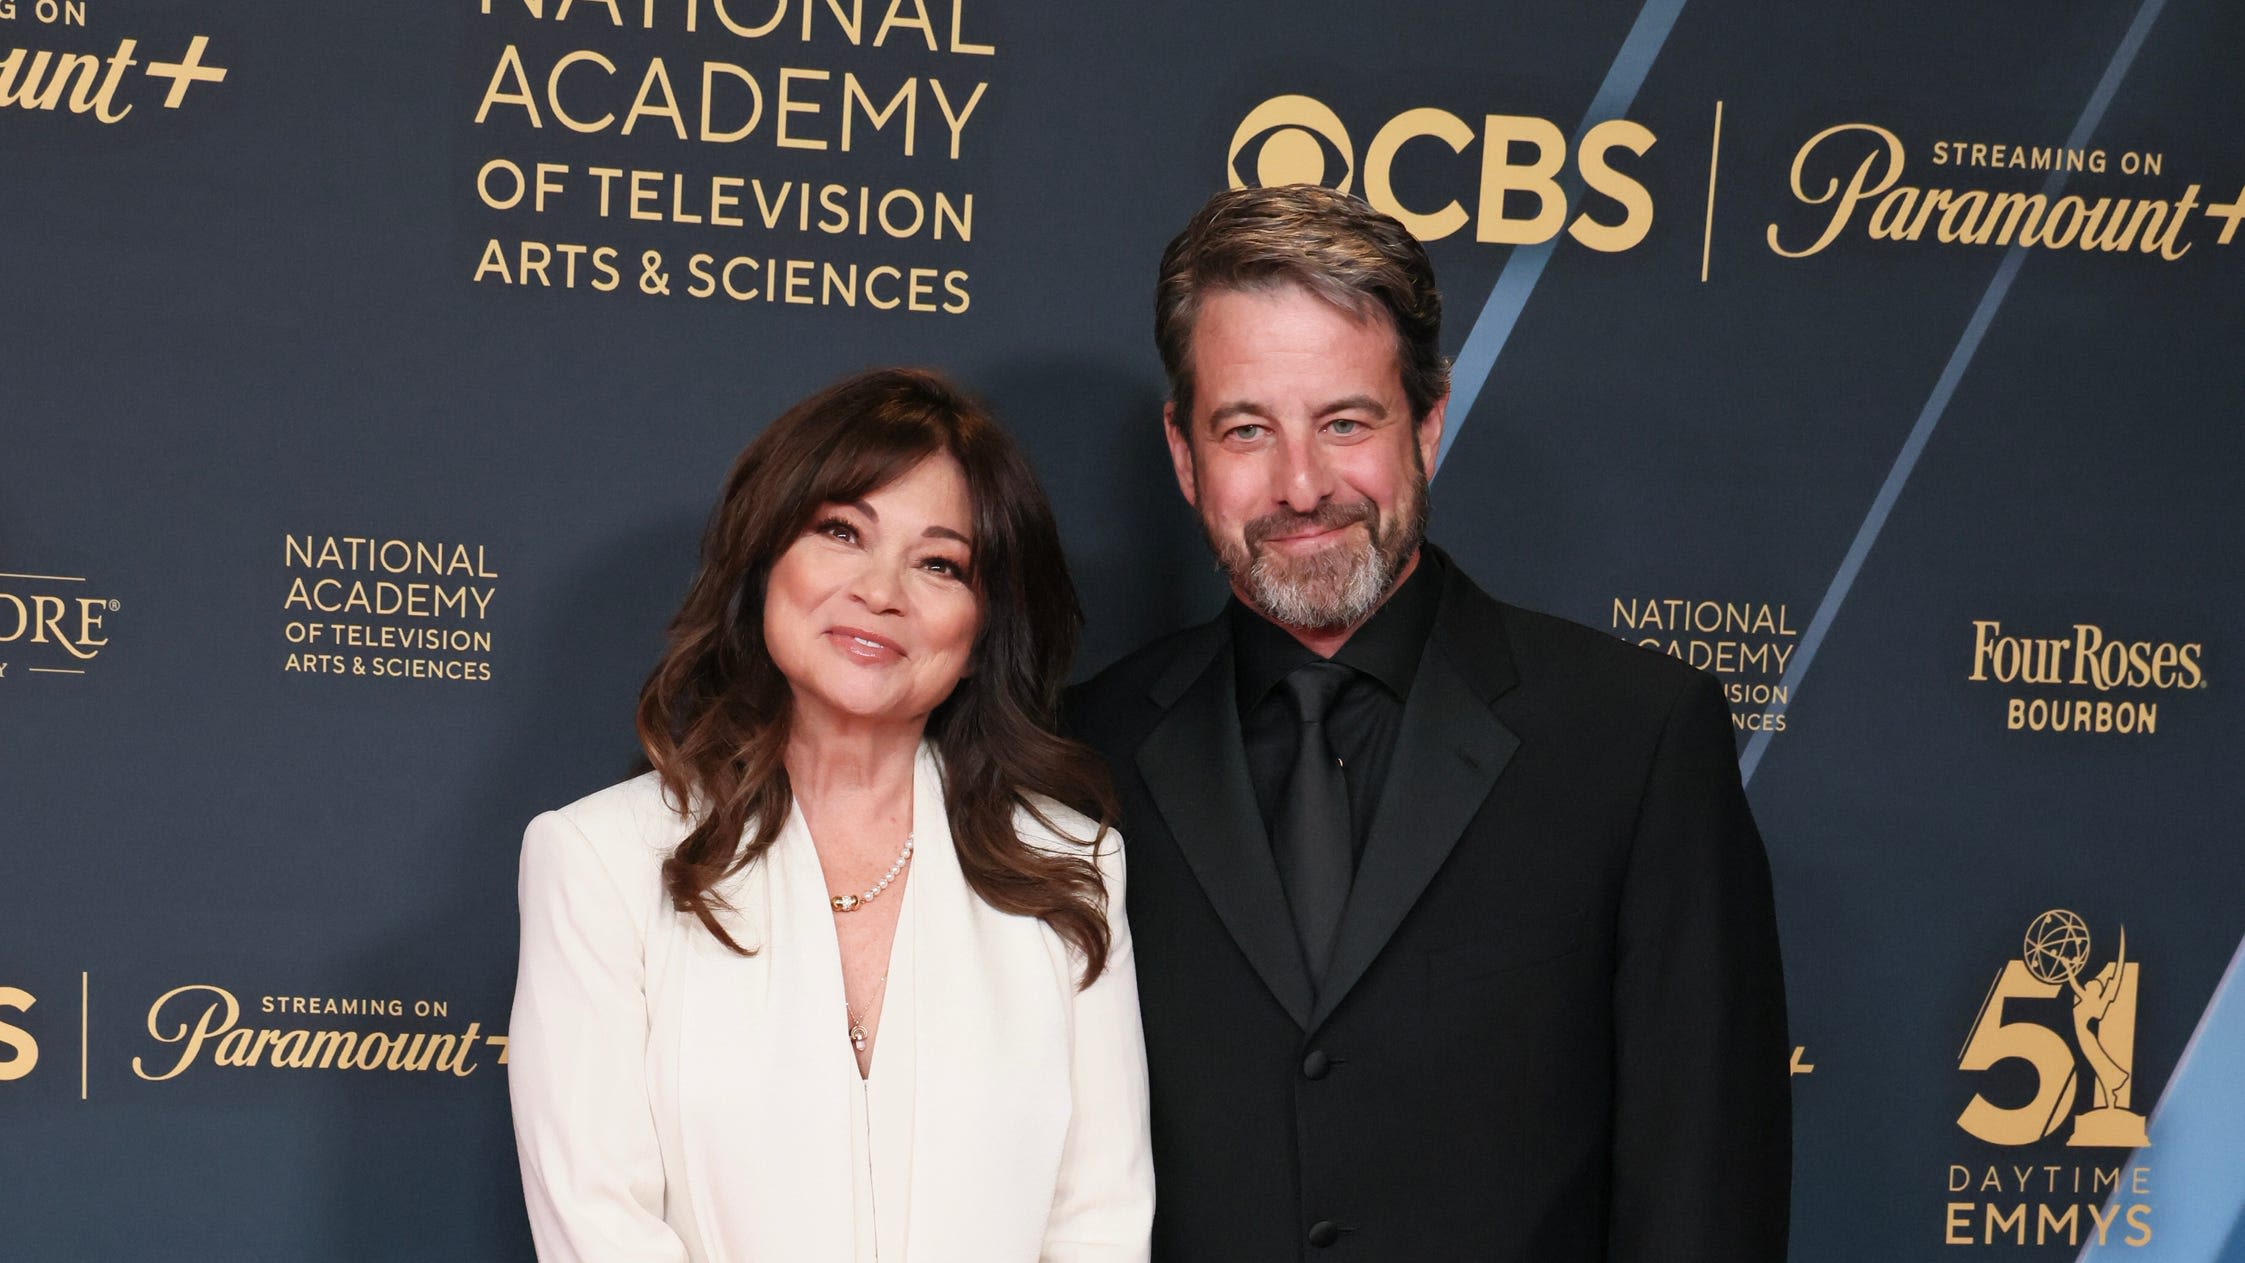 Valerie Bertinelli is on 'healing journey' after past 'toxic' relationships